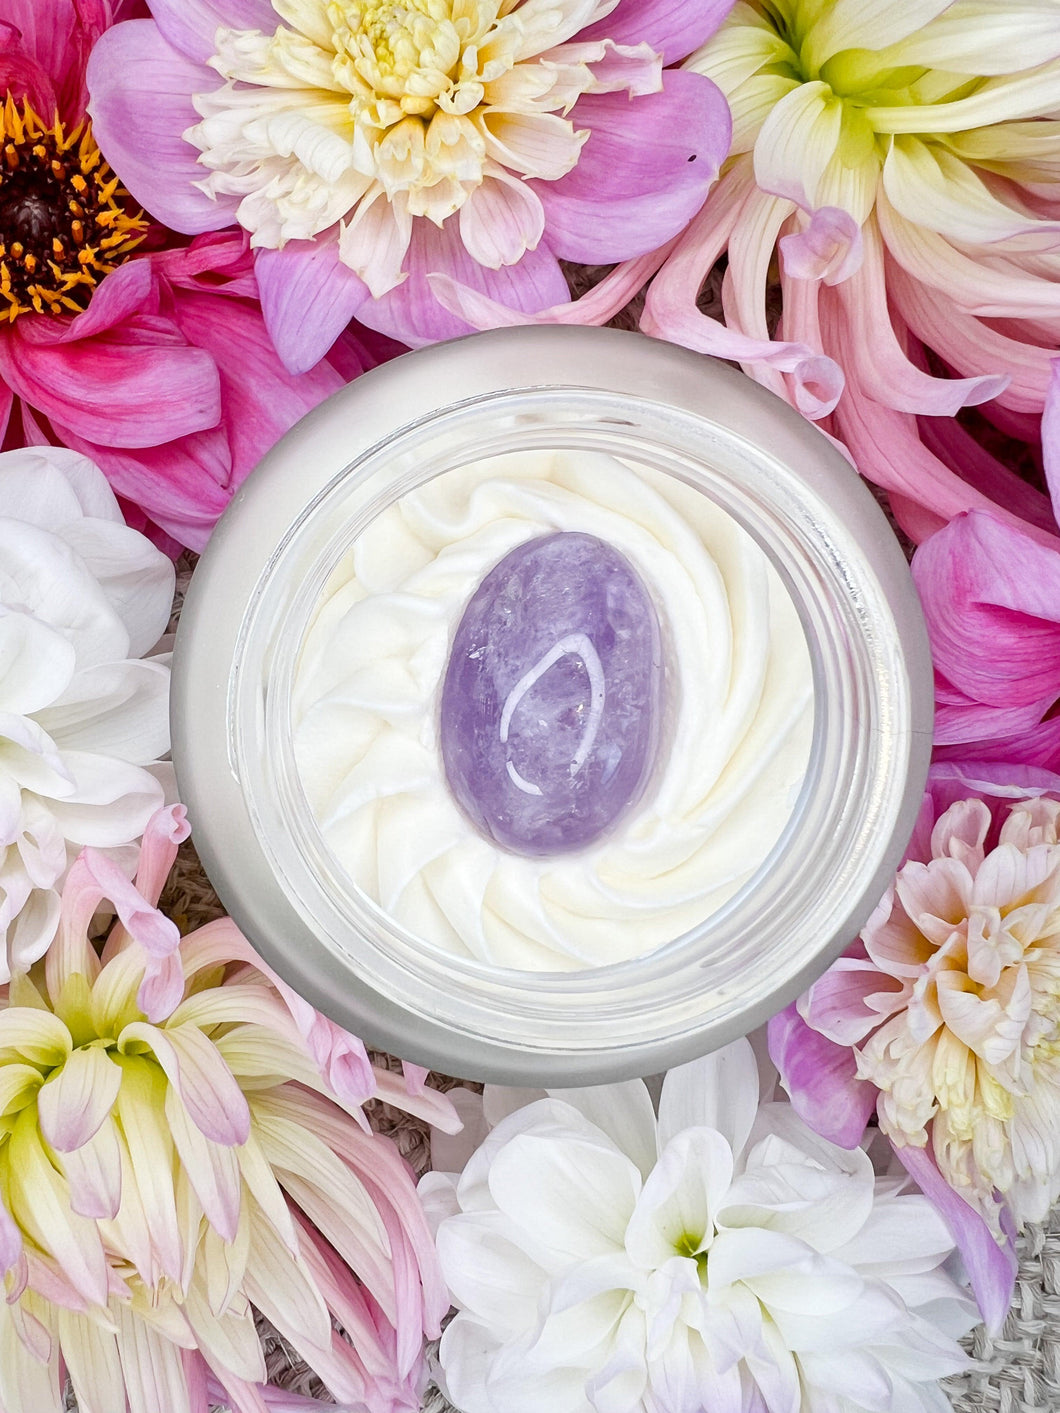 Whipped Body Butter Topped with an Amethyst Crystal | Moonlight Scent - Sunbeam Naturals